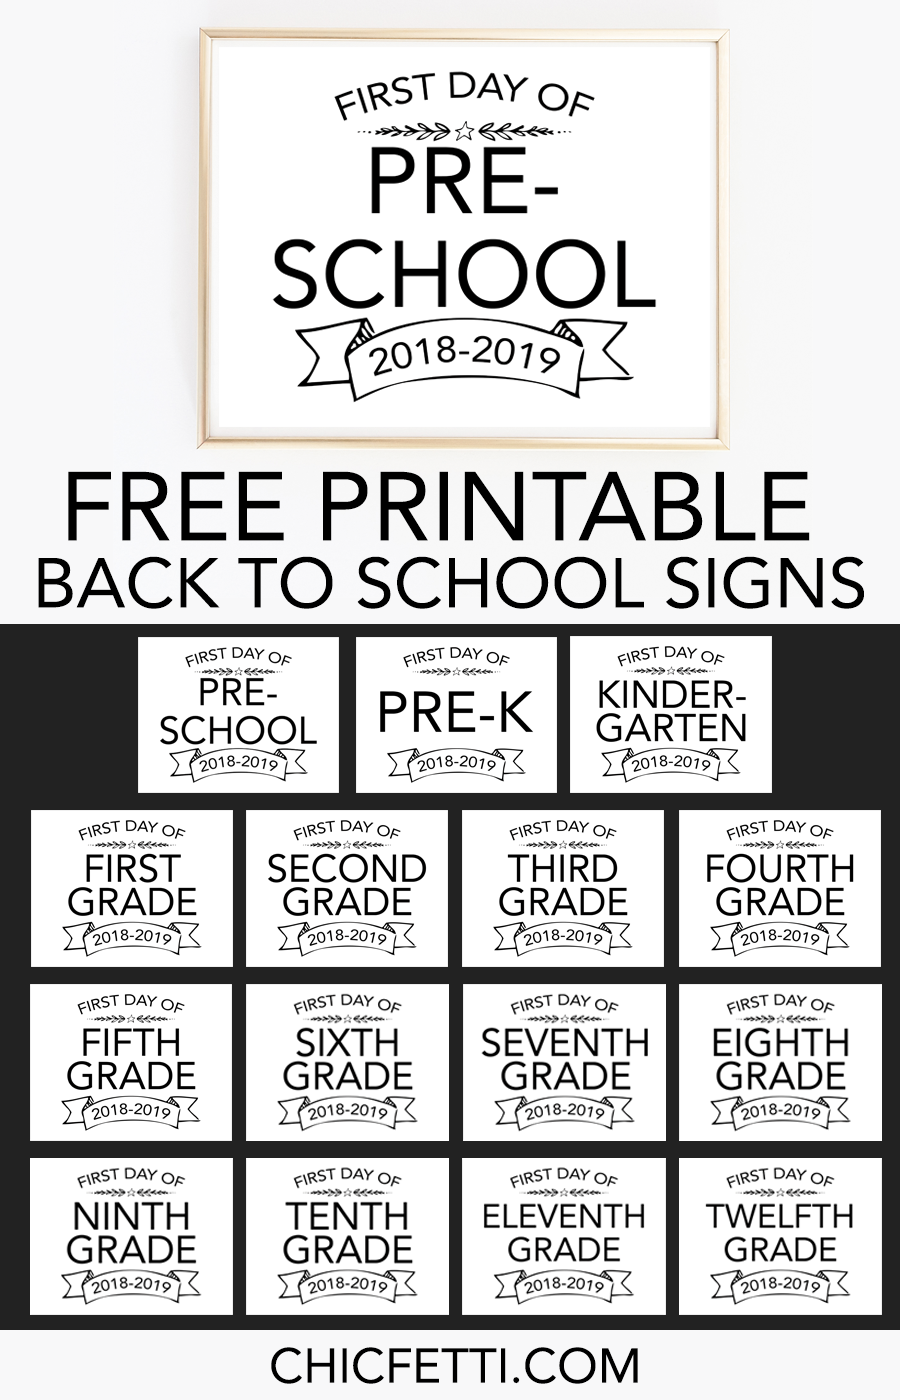 Printable Back to School Signs Print our free first day of school signs